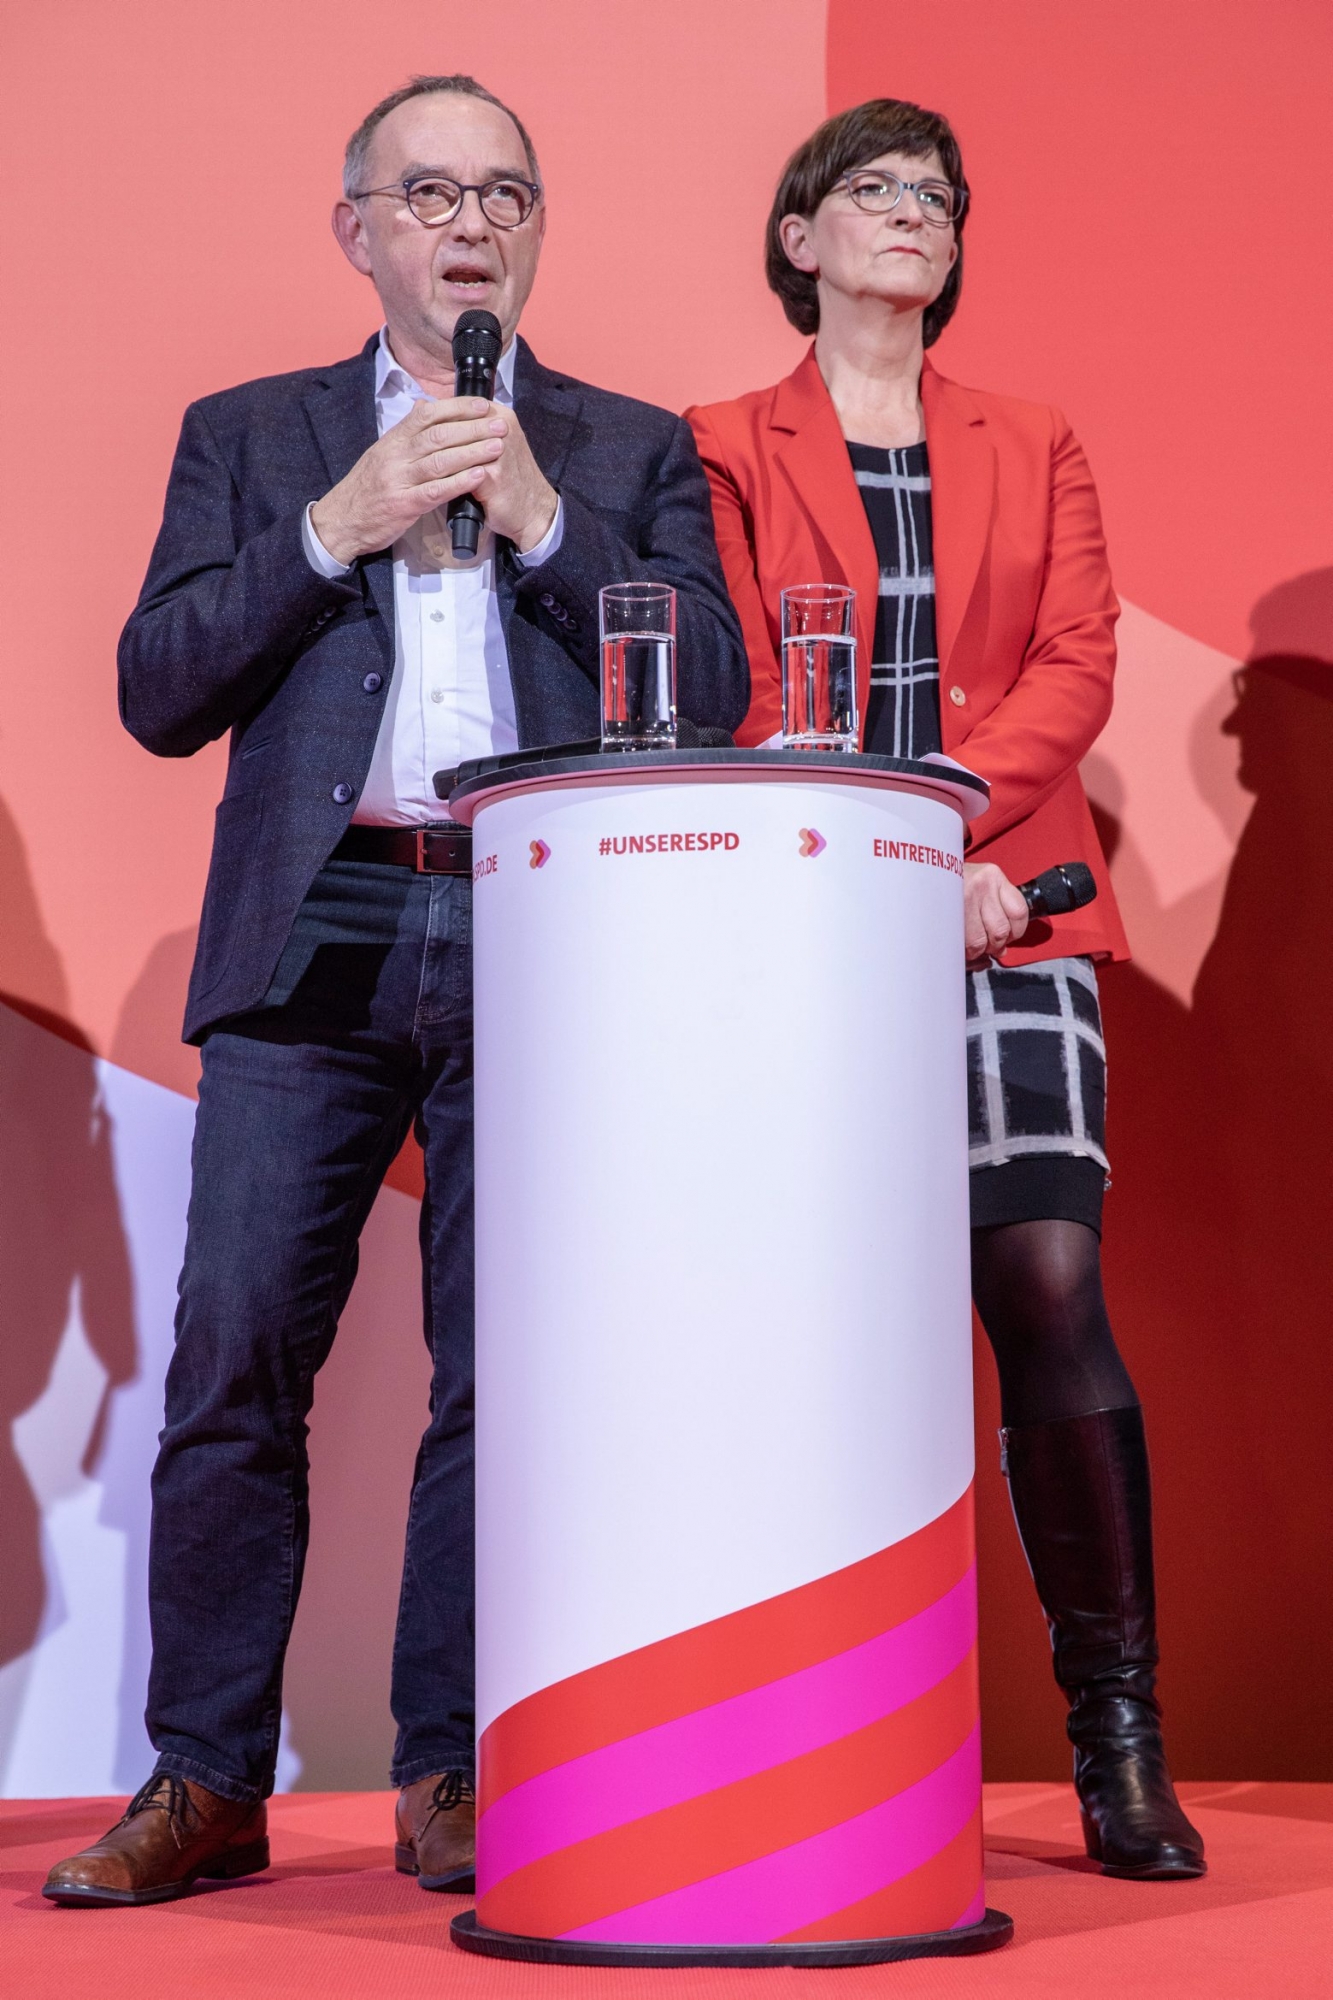 epa08035878 Newly elected co-leaders of the German Social Democratic Party (SPD), Norbert Walter-Borjans (L) and Saskia Esken (R) speak on stage after the announcement of the new SPD leadership vote results at the party's headquarters in Berlin, Germany, 30 November 2019. The SPD on 30 November 2019 announced that Saskia Esken and Norbert Walter-Borjans have won the run-off for party leadership against Klara Geywitz and Olaf Scholz. A party conference in December has to formally approve the new leadership.  EPA/OMER MESSINGER GERMANY PARTIES SPD LEADERSHIP